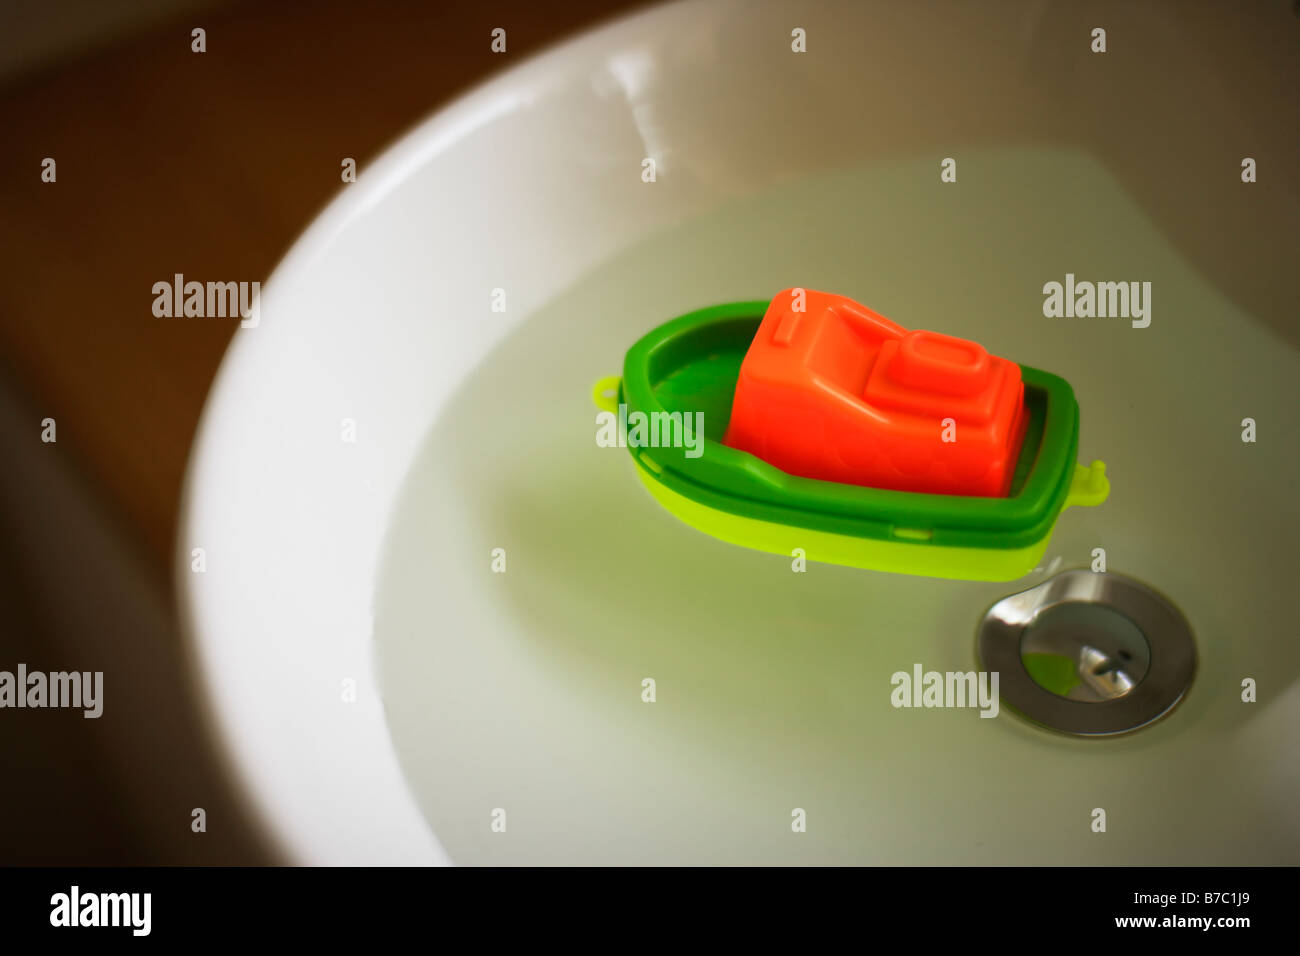 Child's toy plastic boat in sink full of water Stock Photo